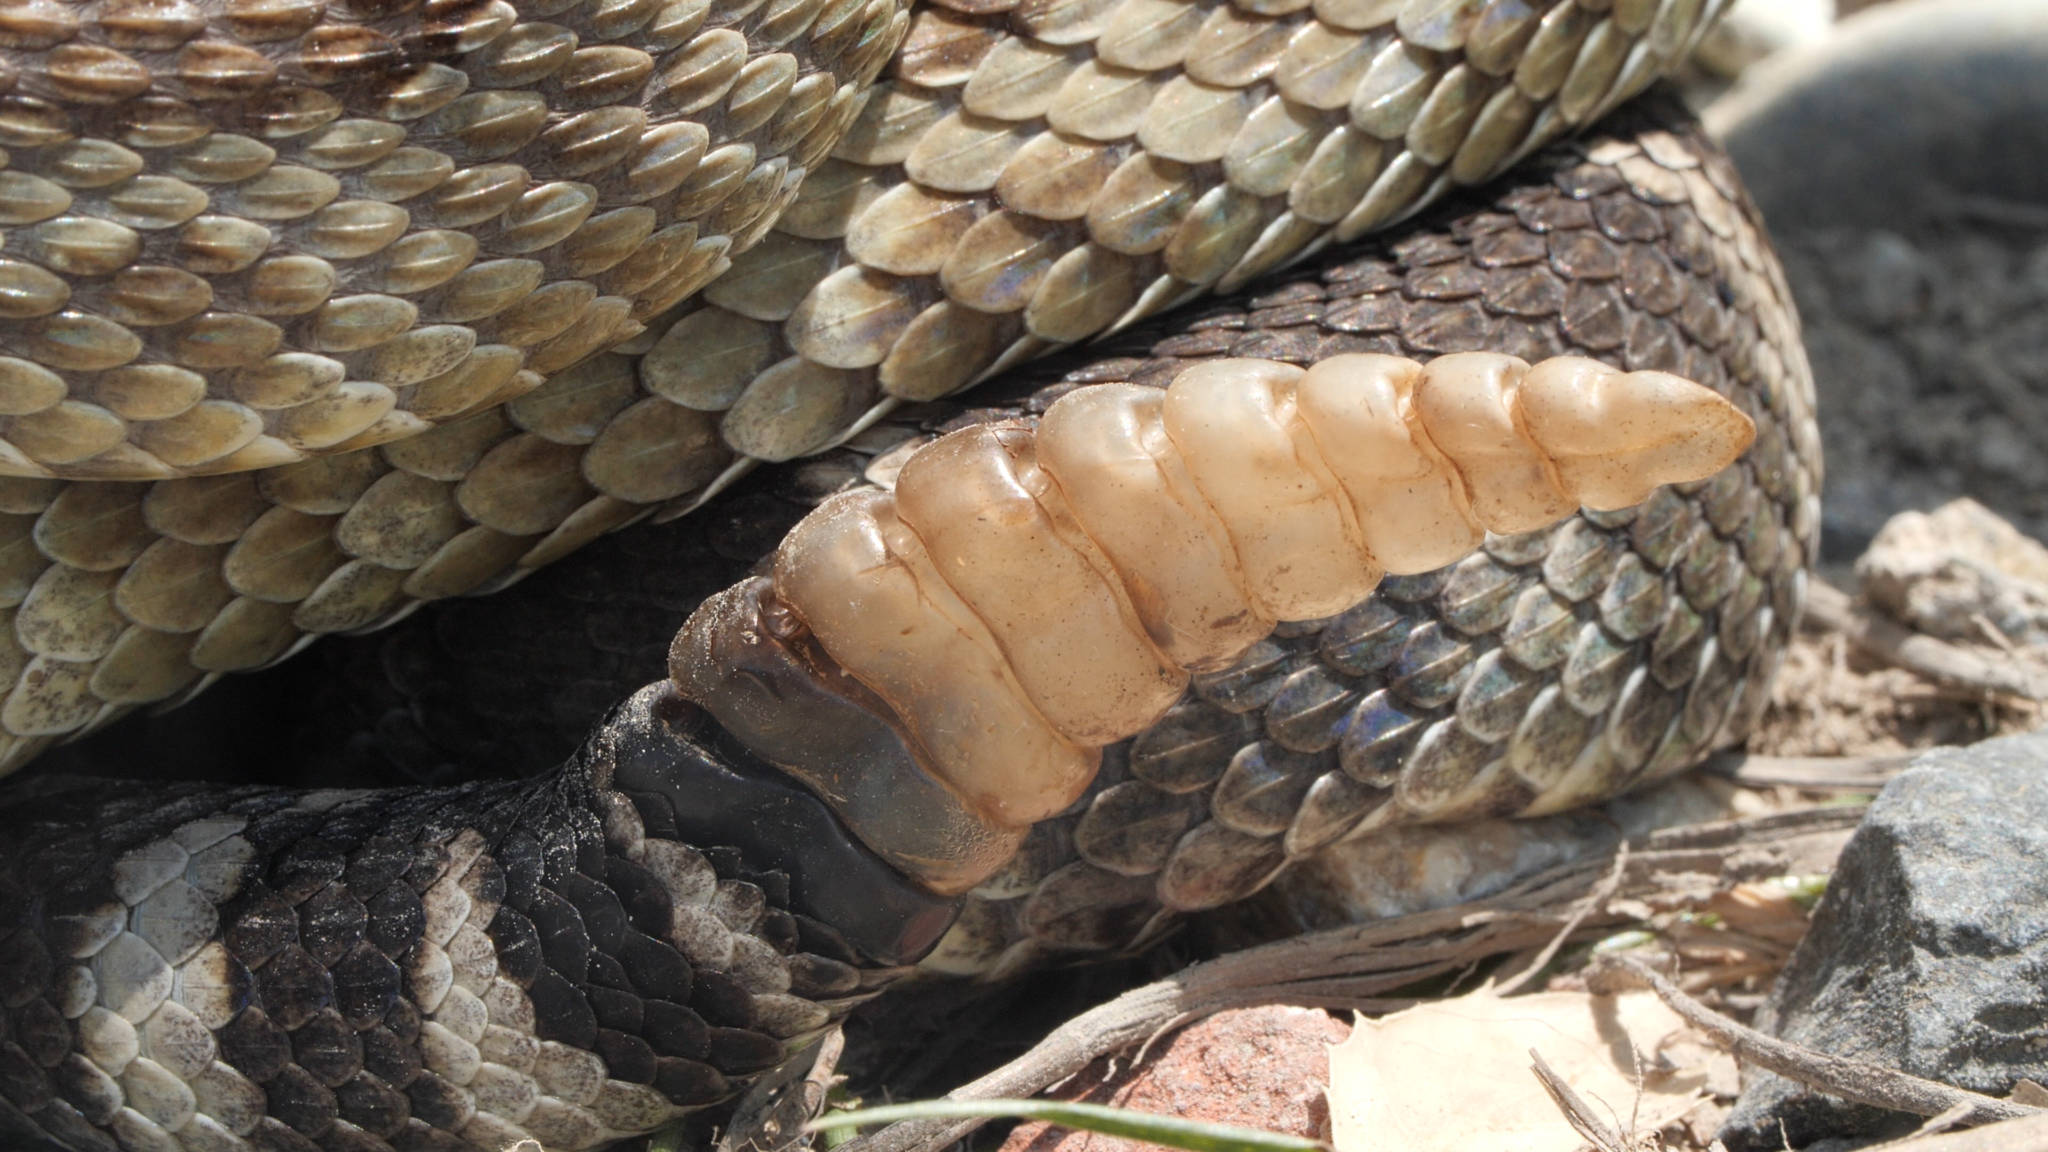 Do Rattlesnakes Shed Their Rattles?